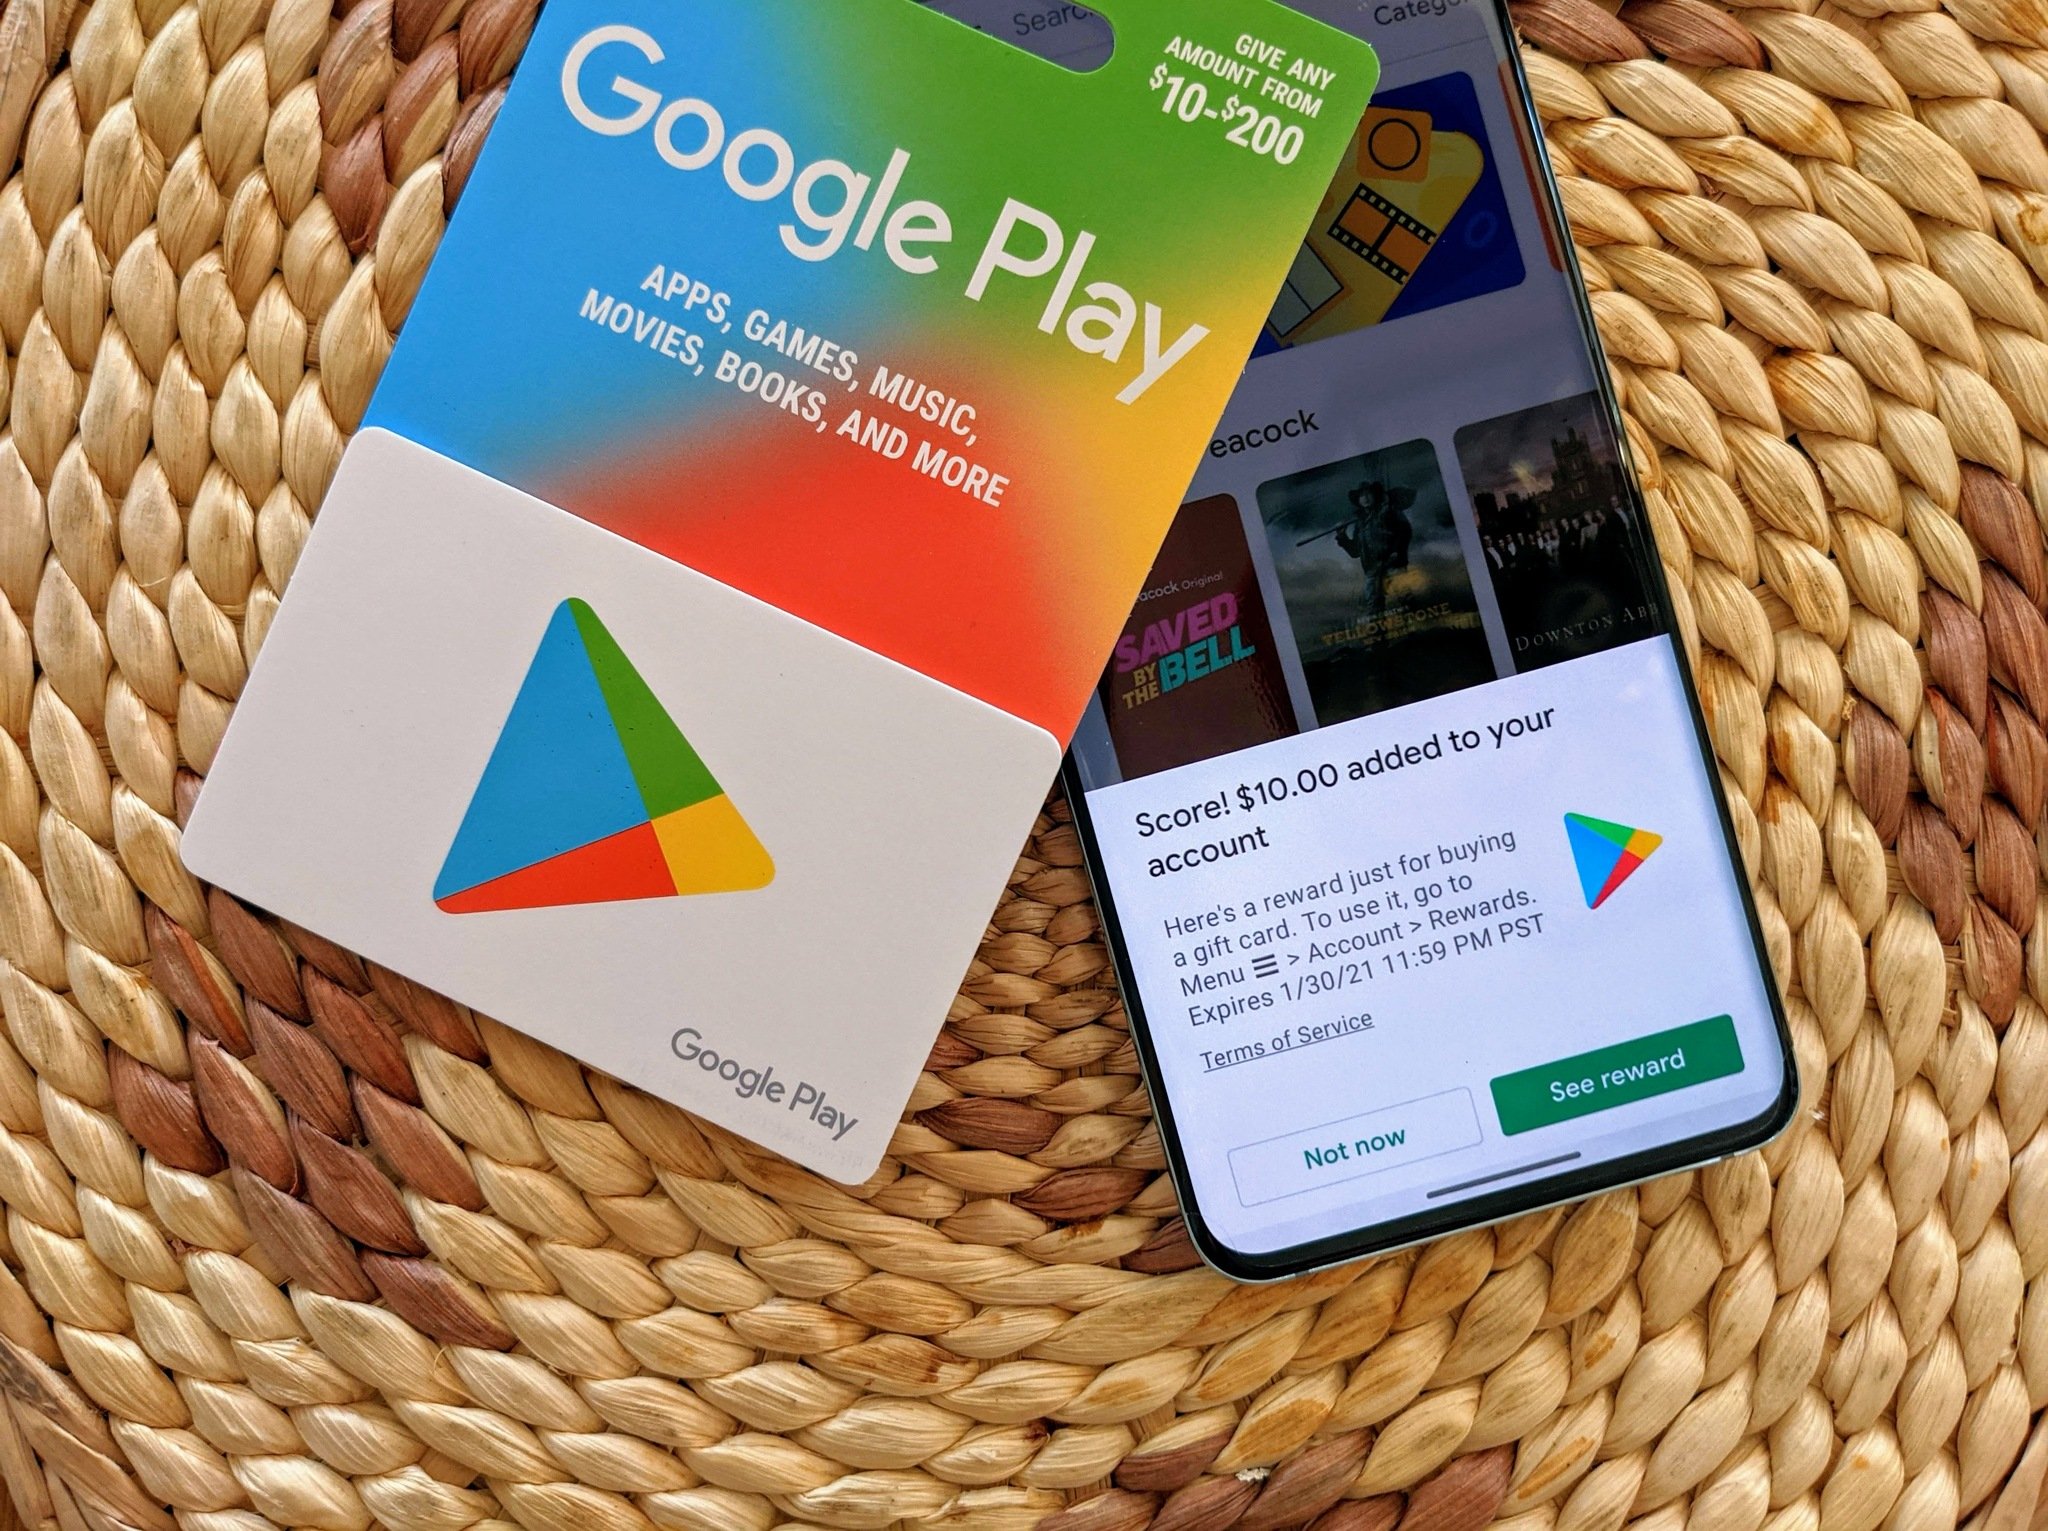 Can I Use Google Play Gift Card on Google Store?